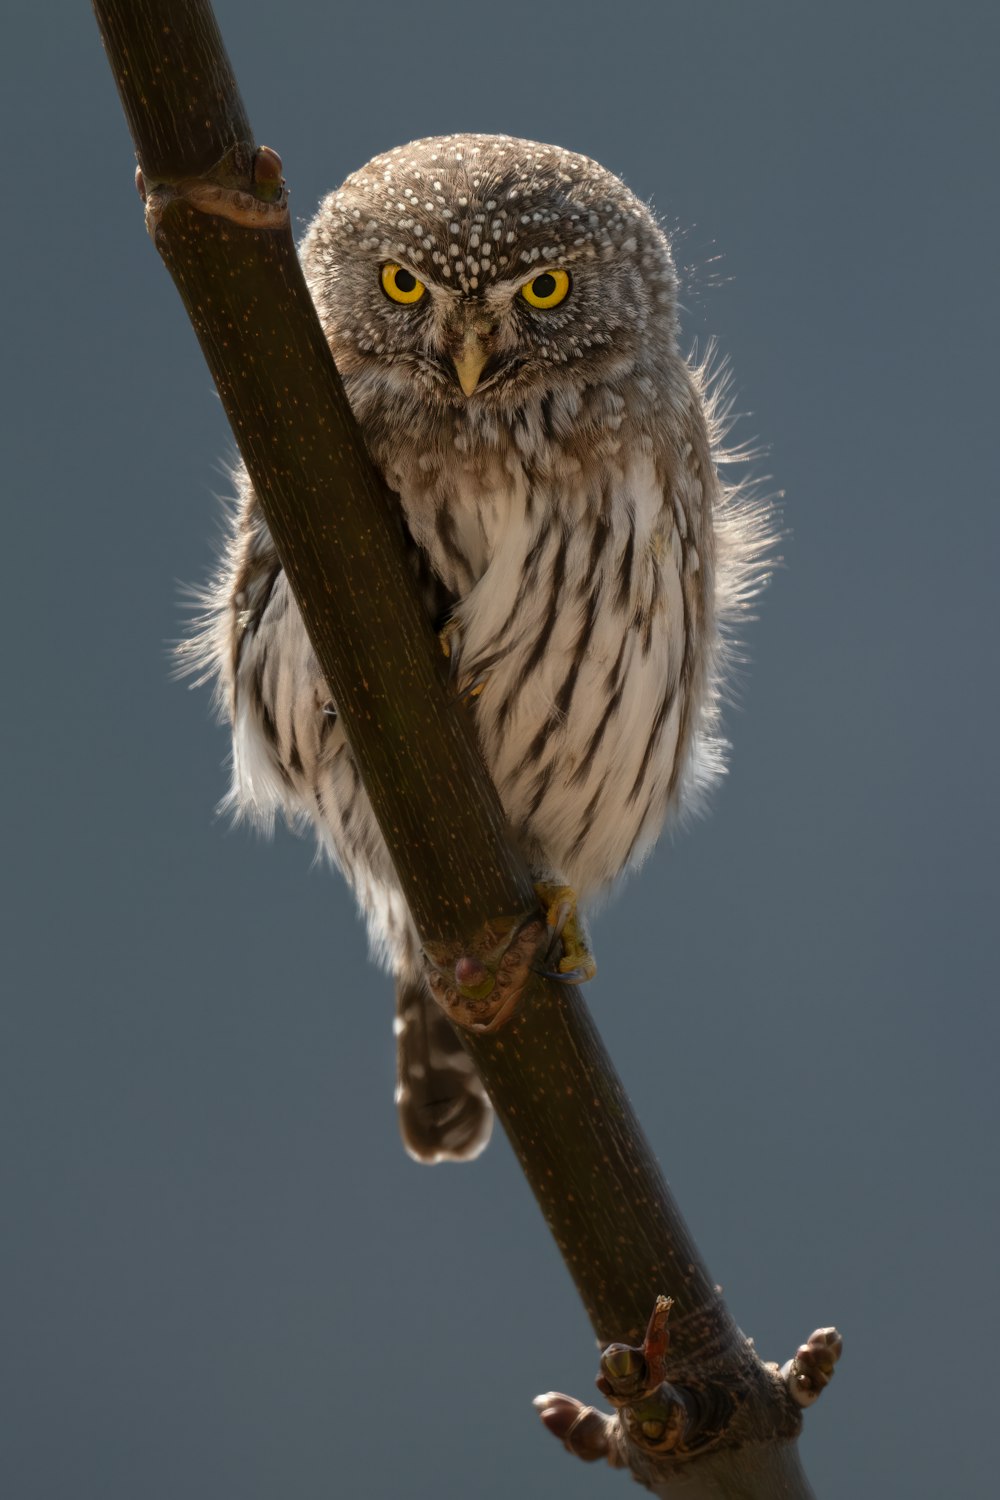 a small owl is perched on a branch